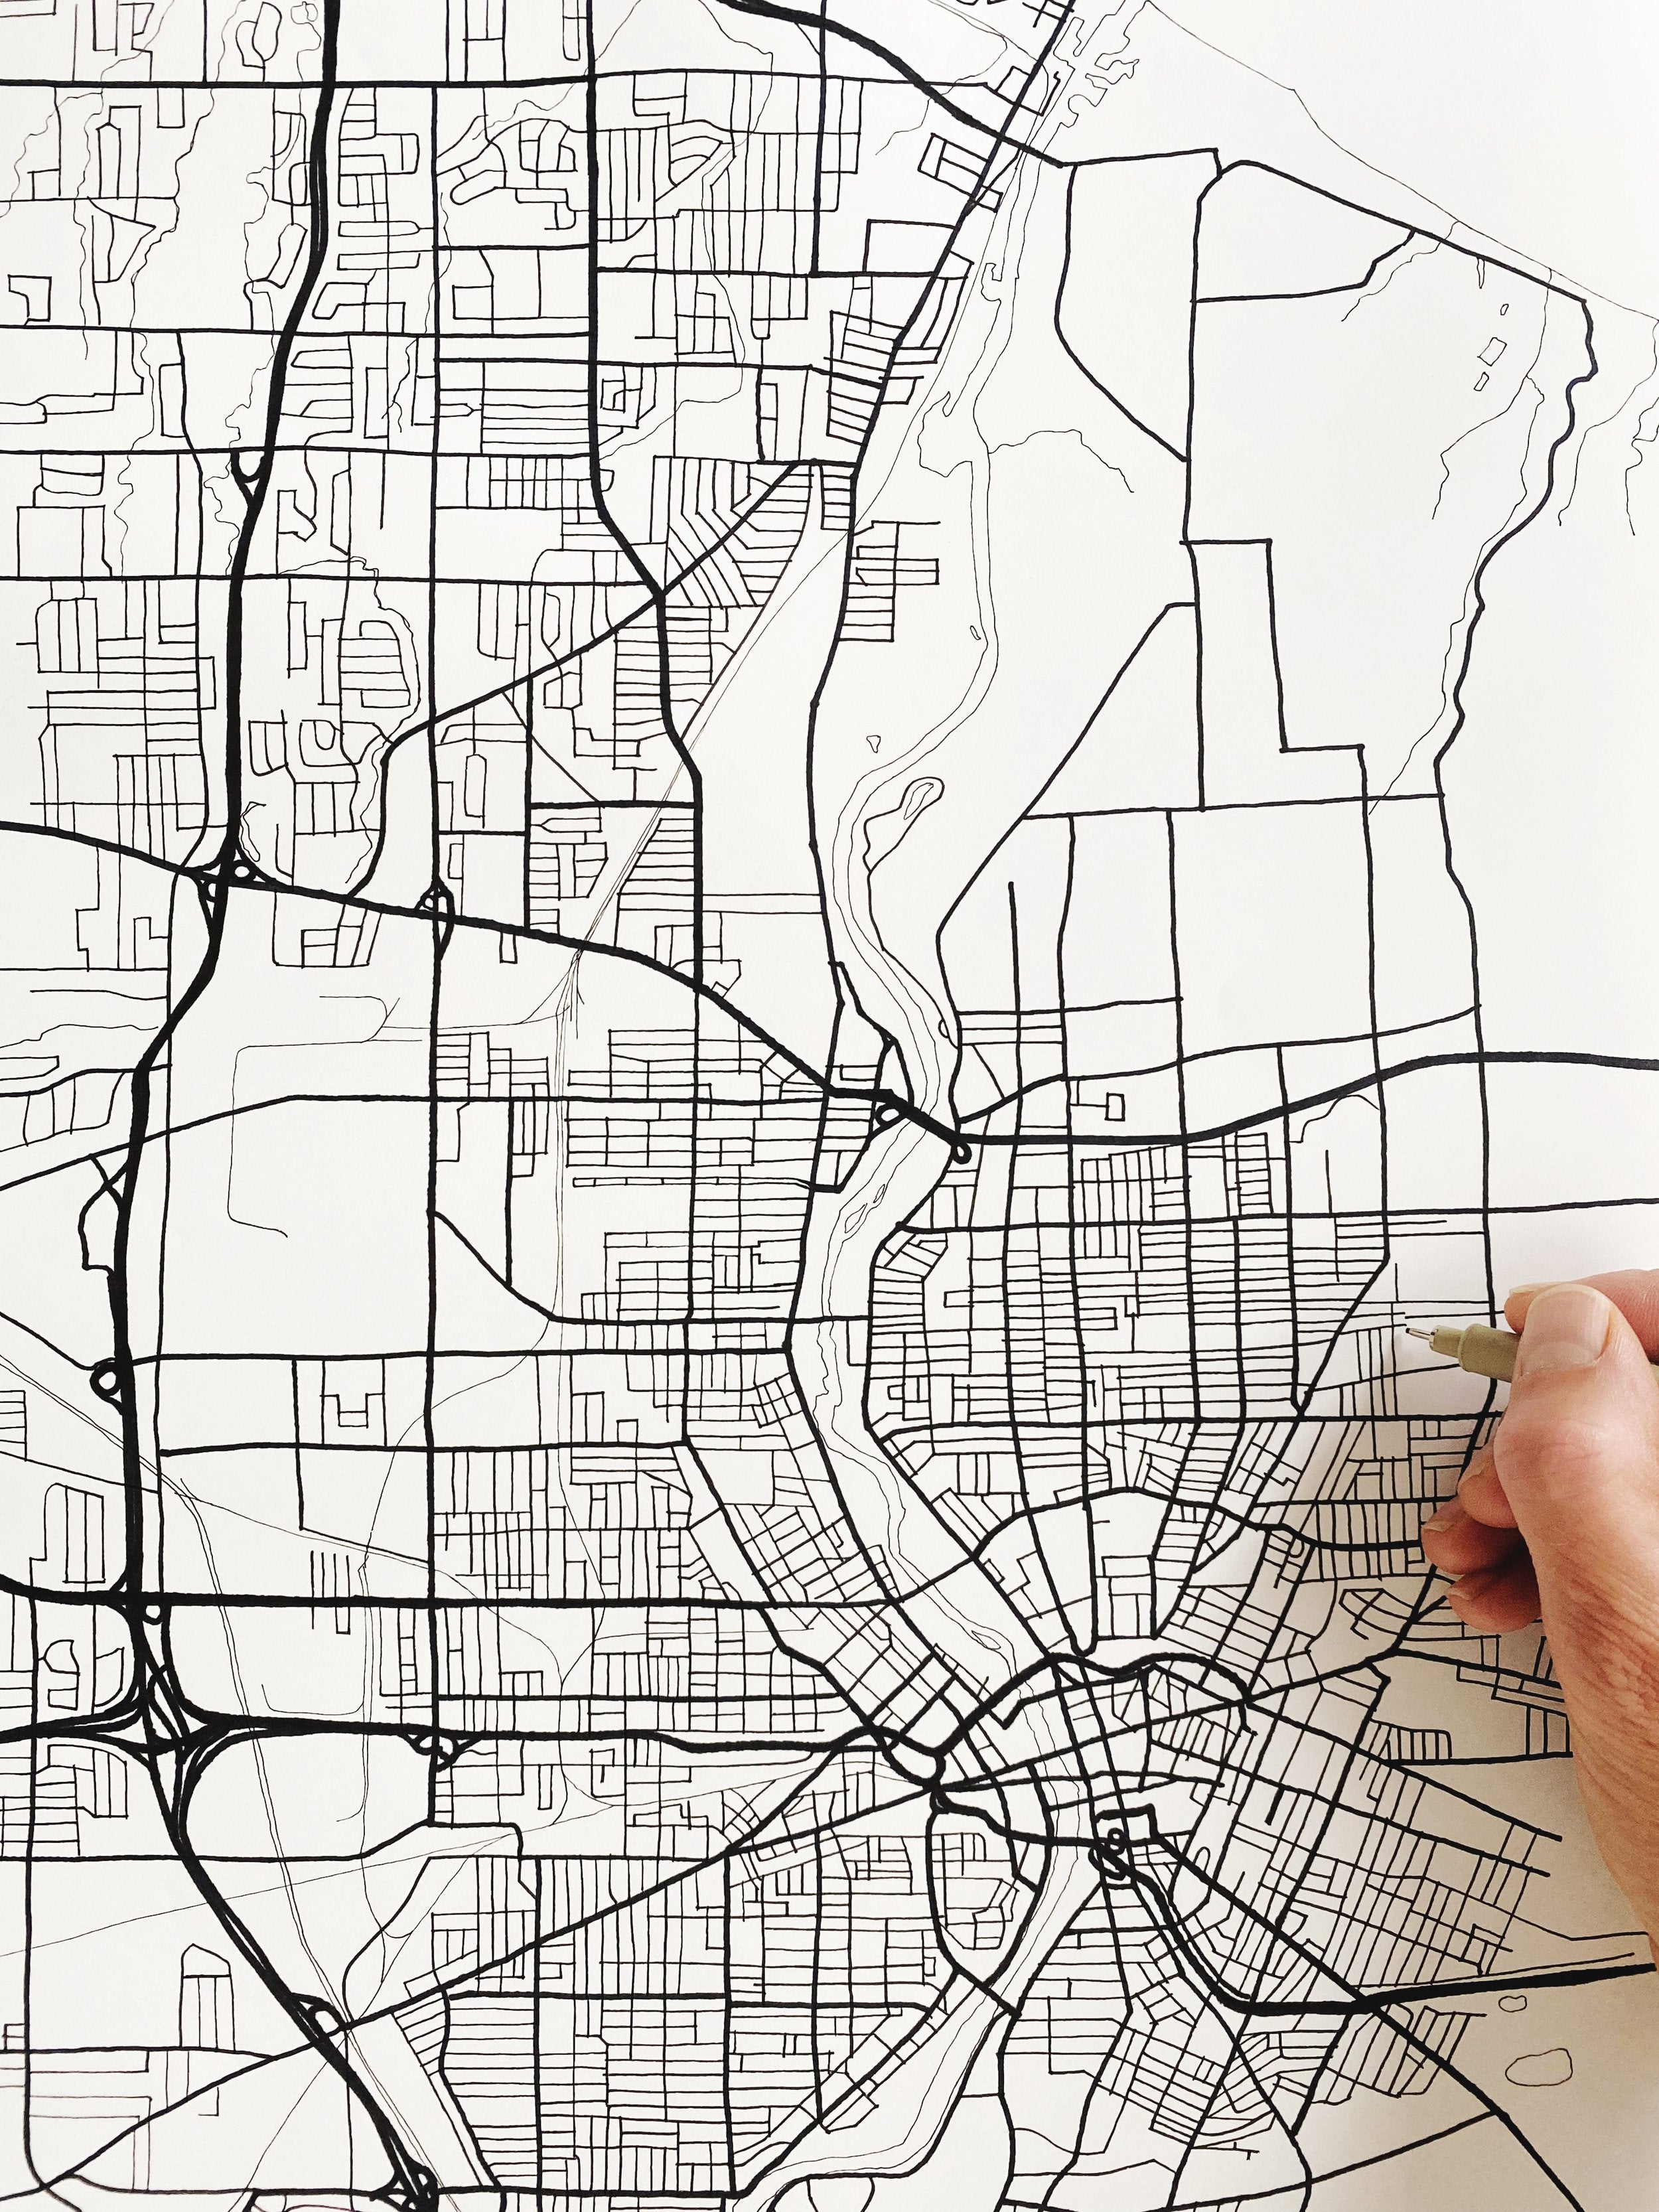 ROCHESTER New York City Lines Map: PRINT